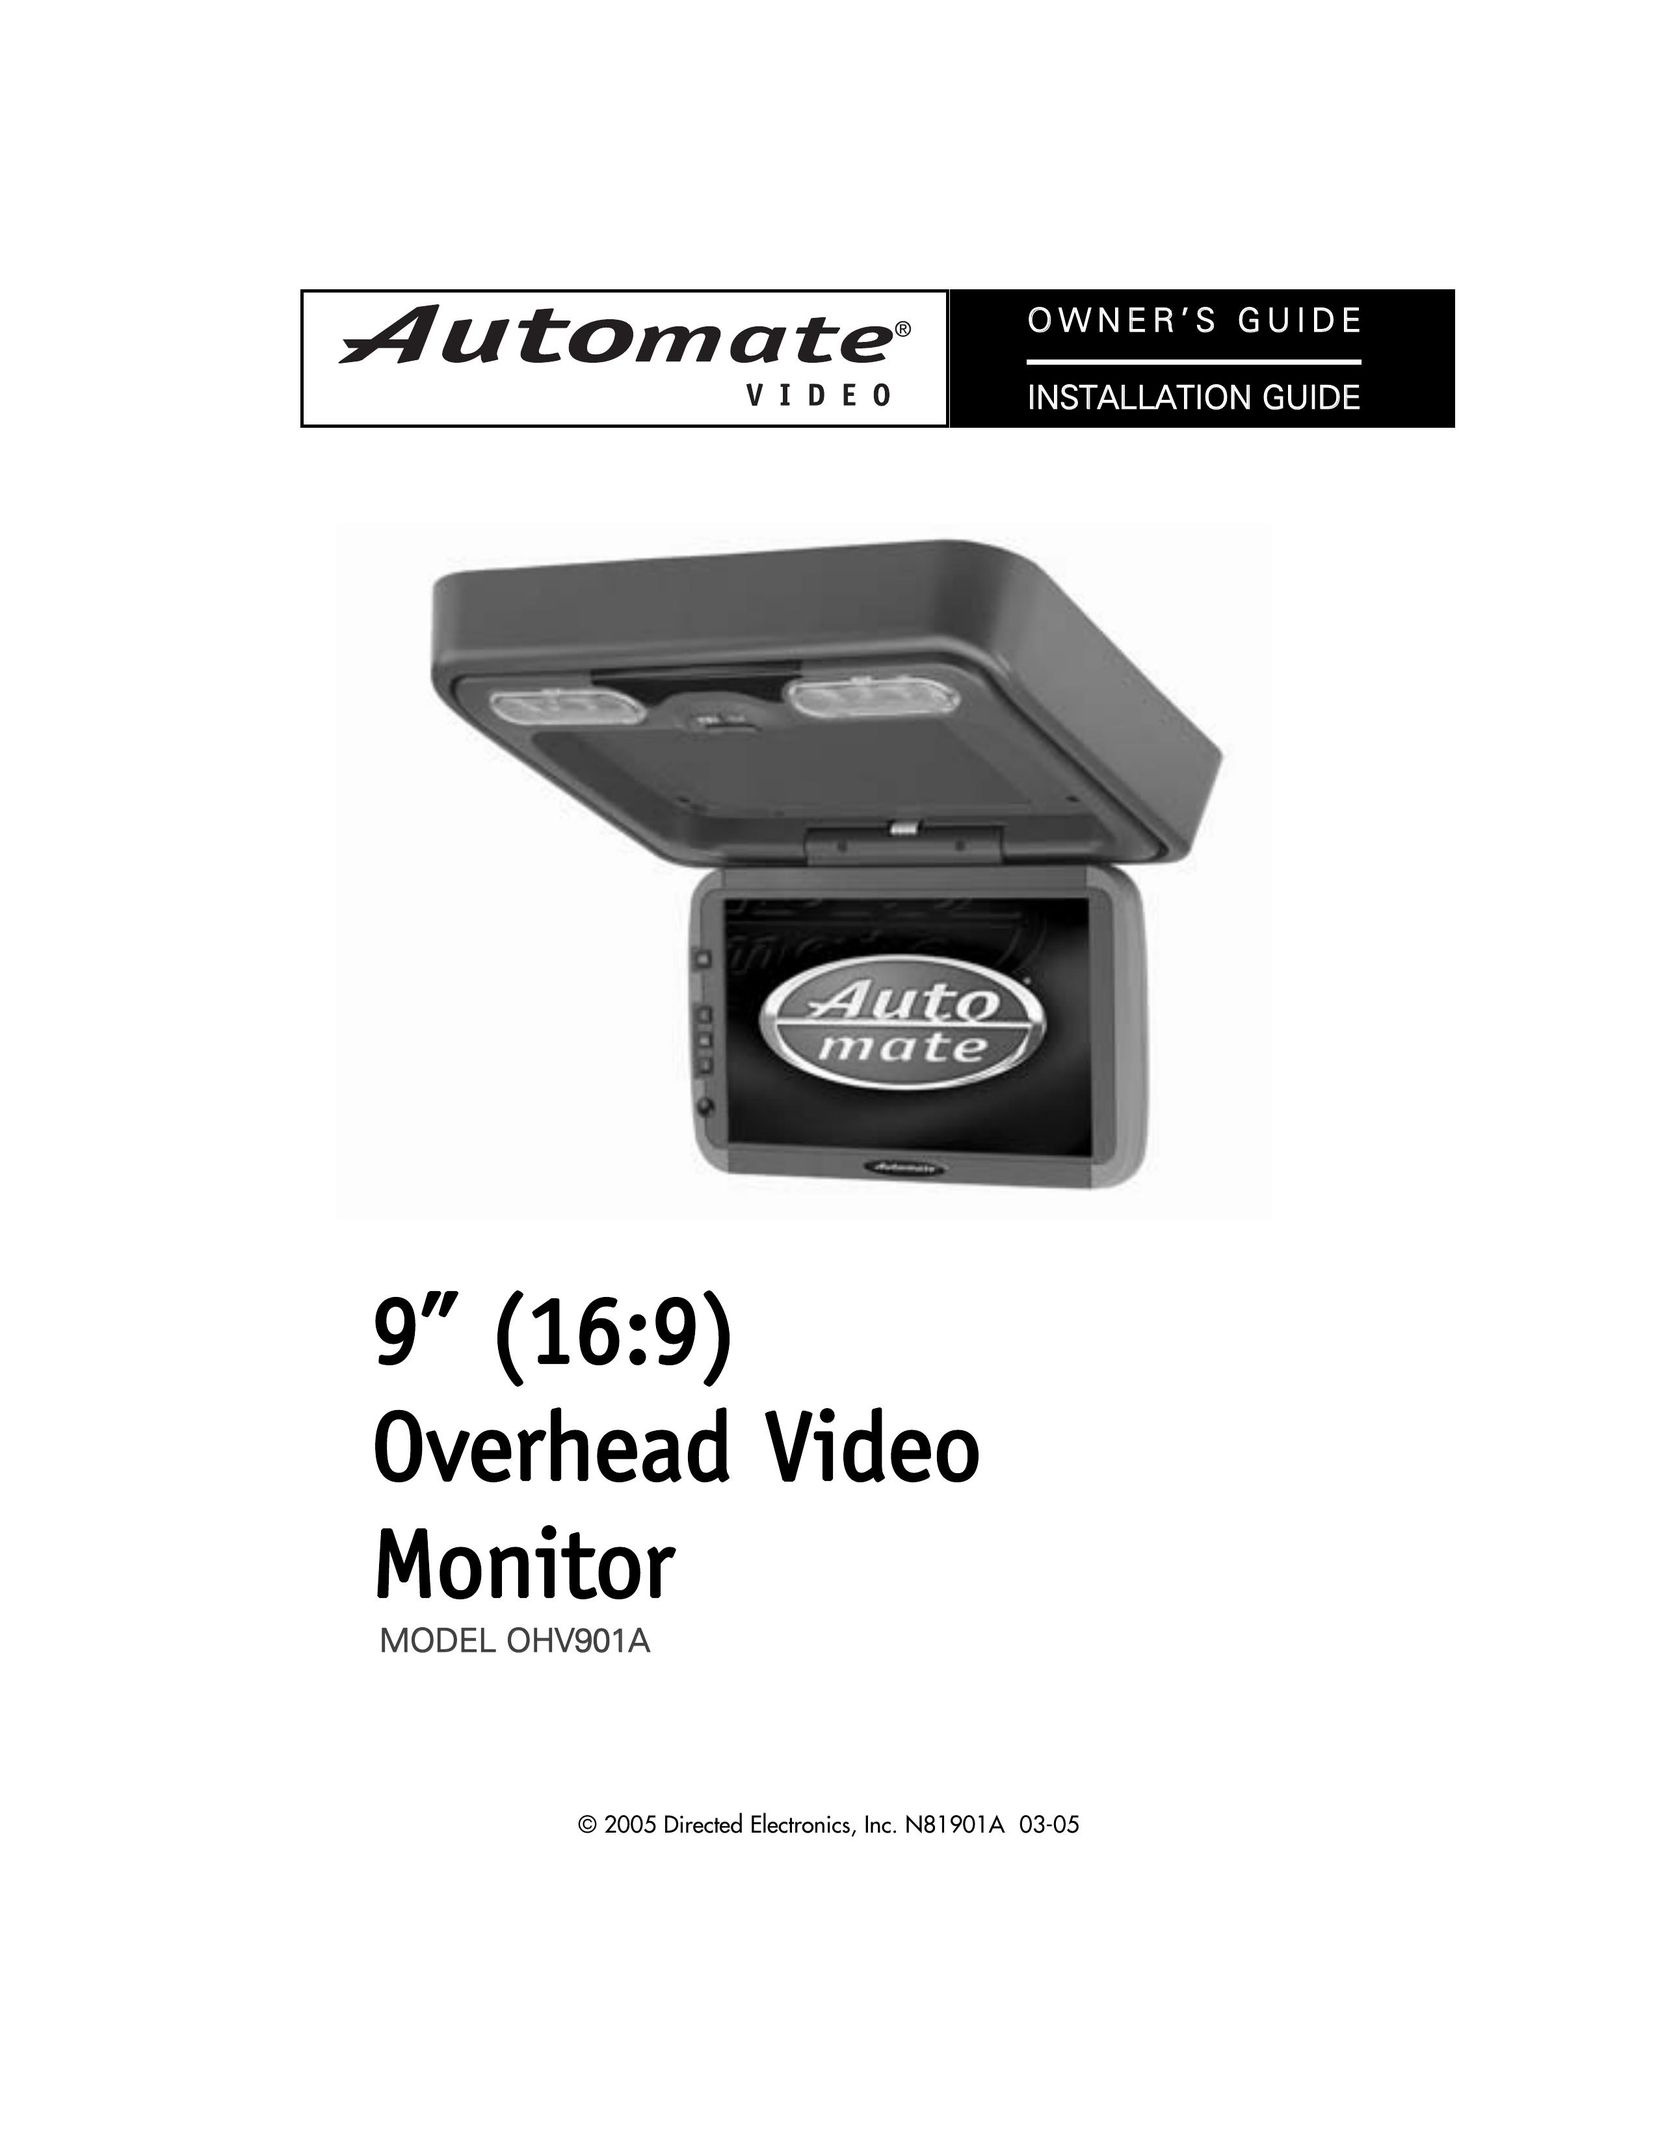 Directed Electronics OHV901A Car Video System User Manual